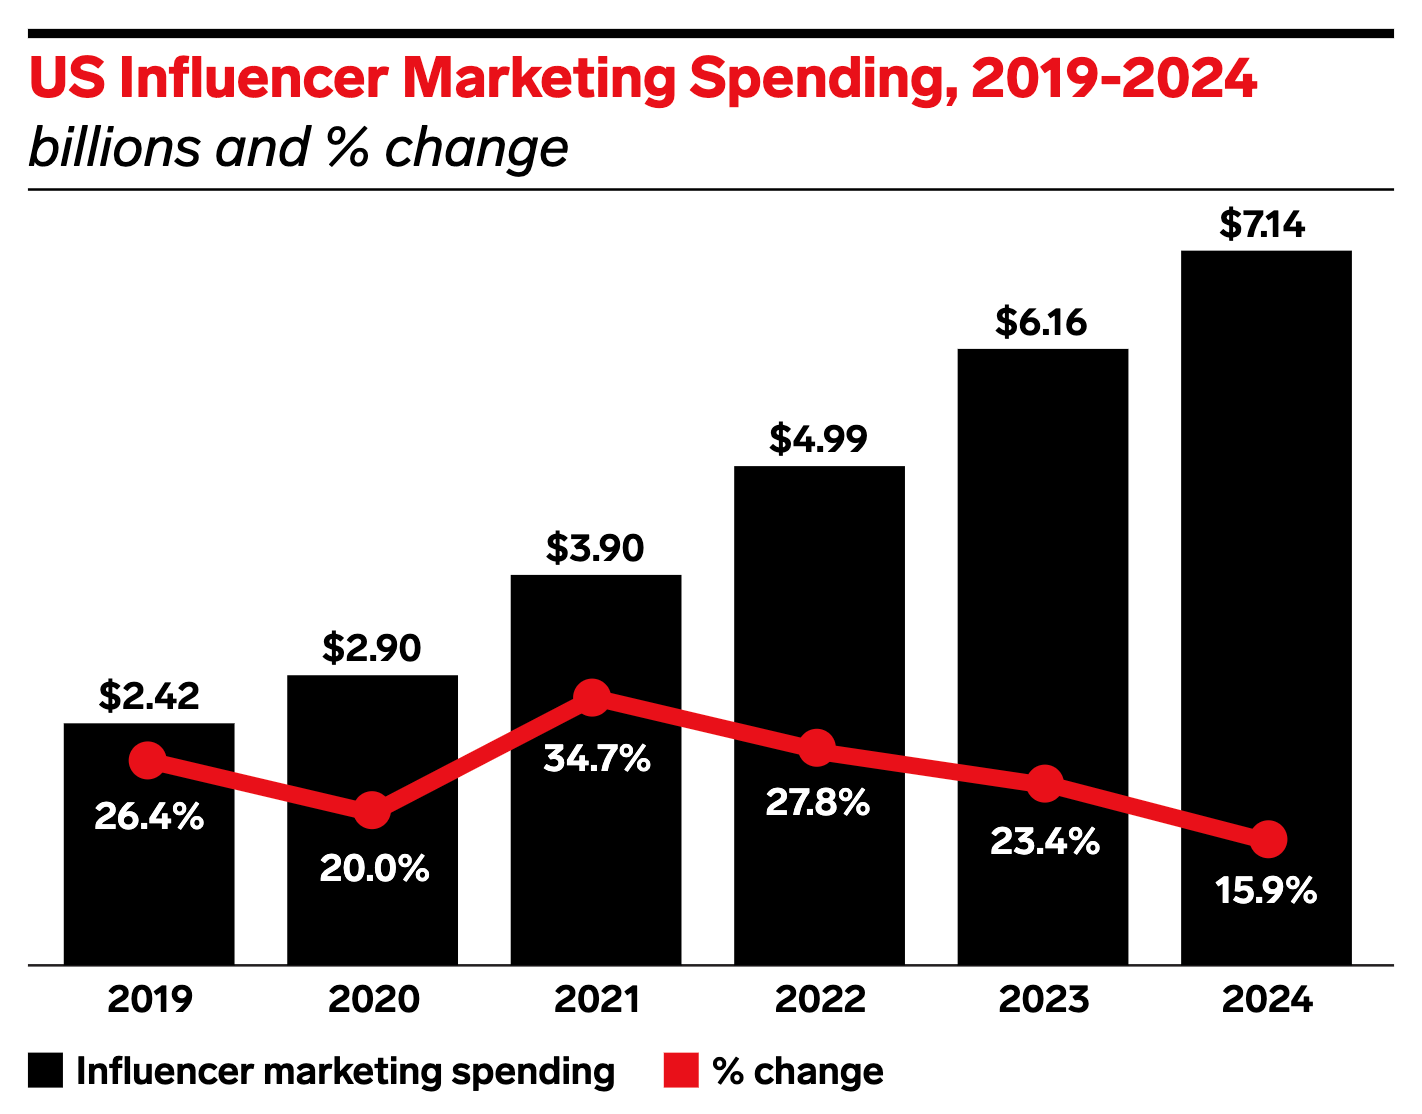 photo that highlights the year over year spend growth in US influencer marketing and their total spend by annual measurements